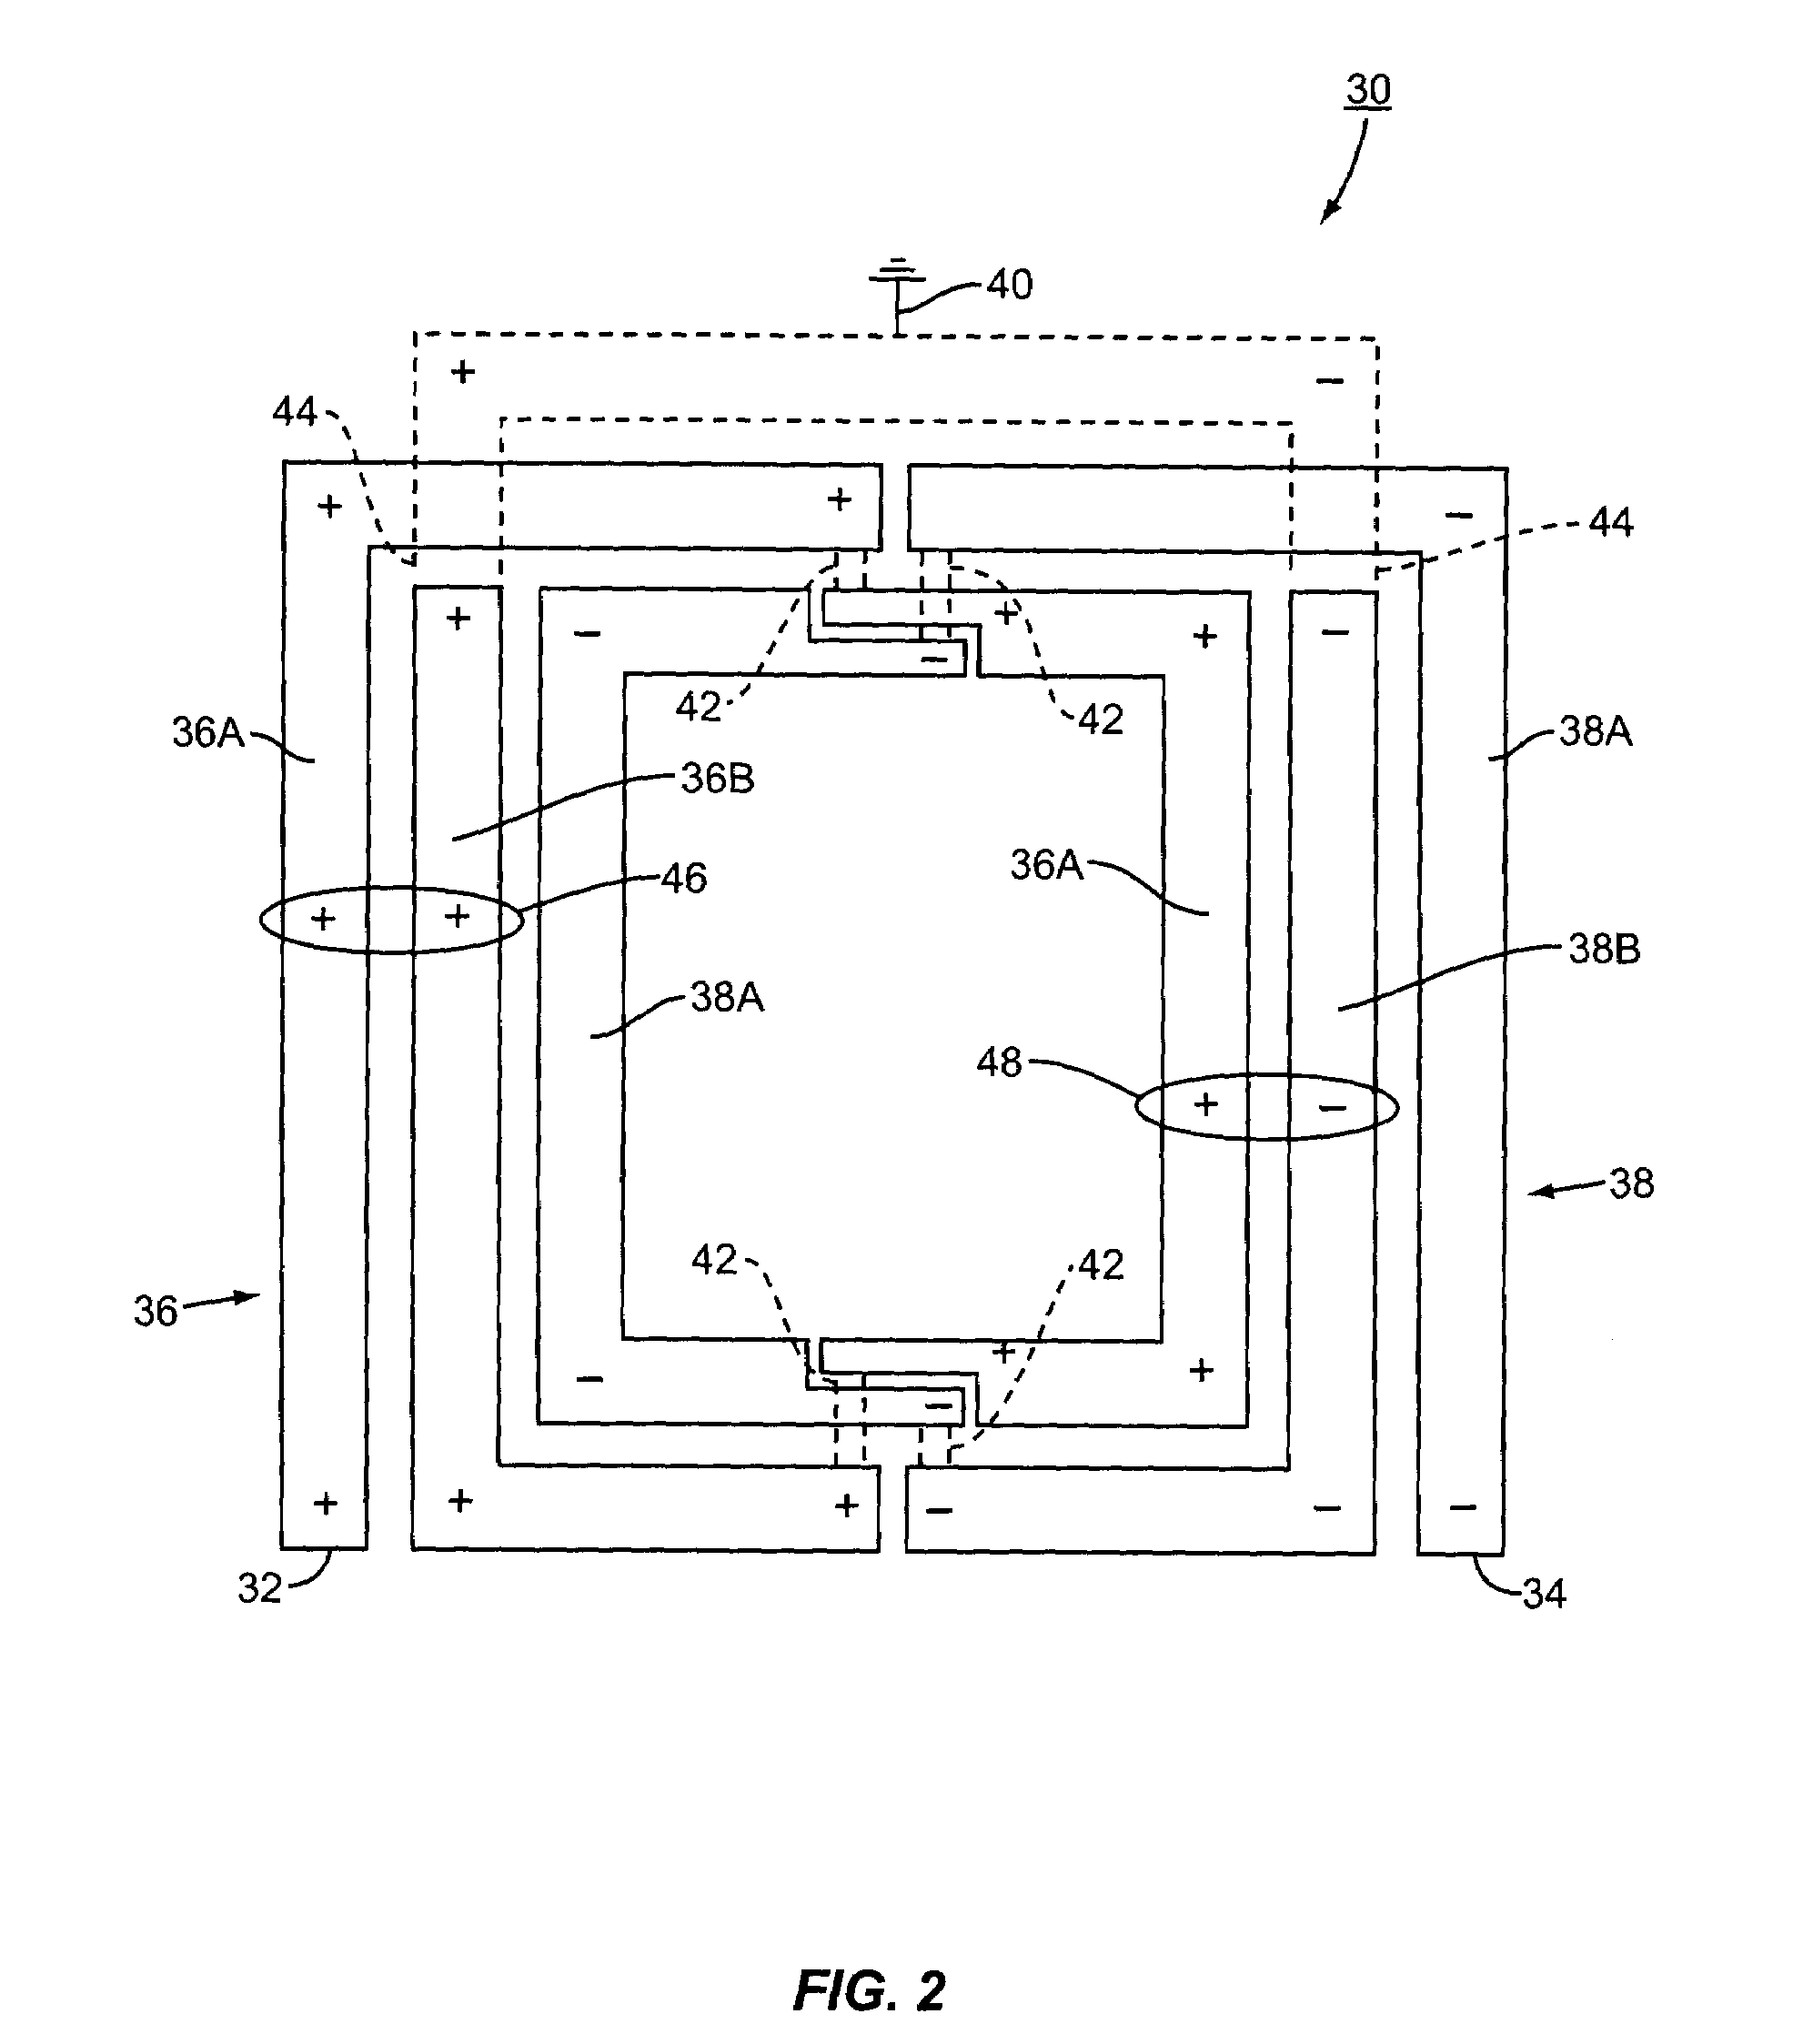 Differential inductor design for high self-resonance frequency